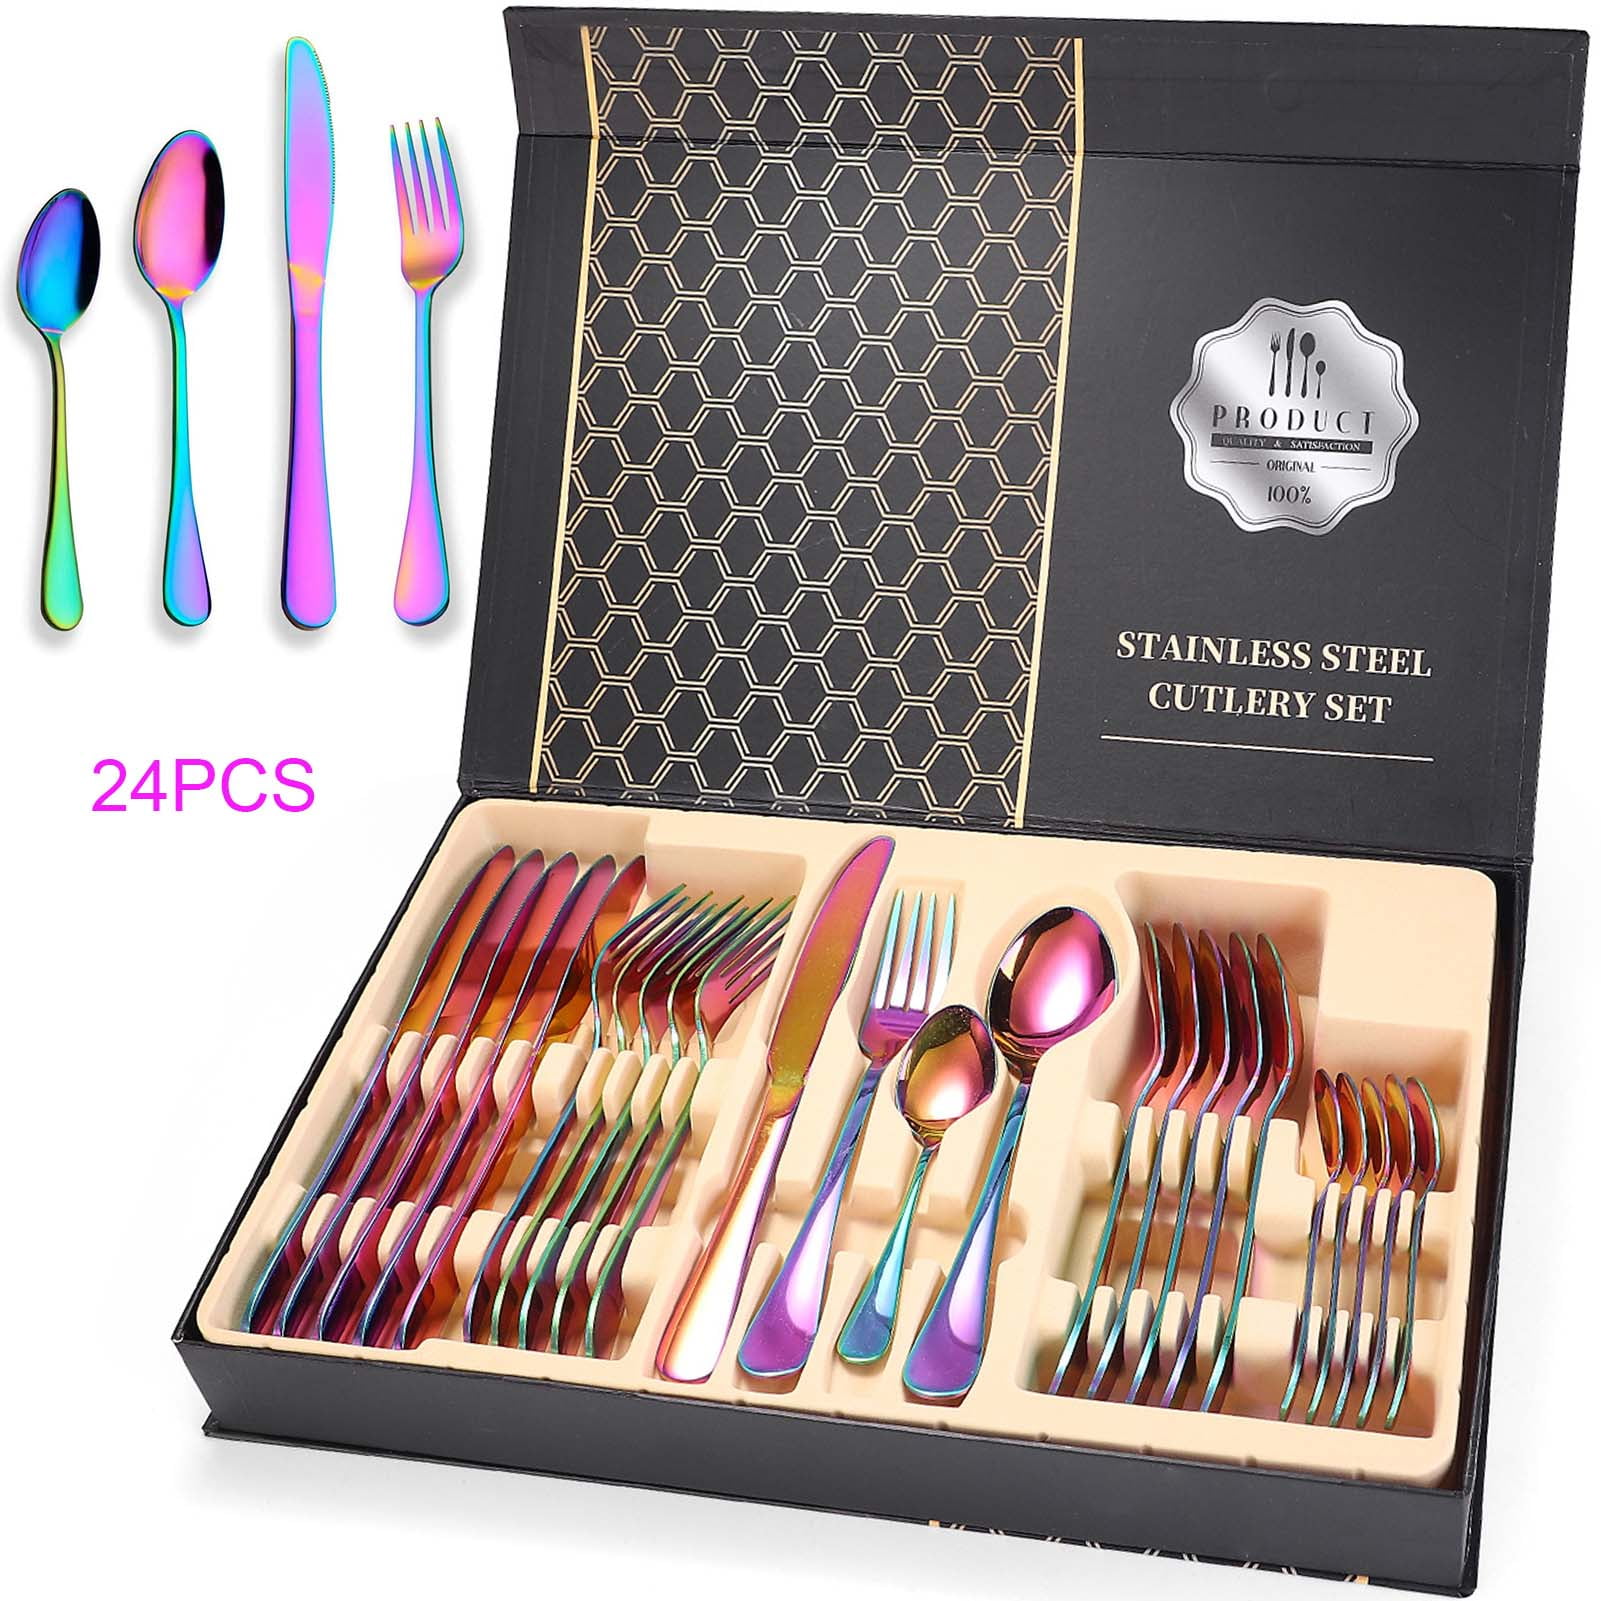 Colorful Silverware Set, 24-Piece Stainless Steel Rainbow Flatware Set, Iridescent Cutlery Utensils Set Service for 6, Mirror Polished, Dishwasher Safe(Muti-colorful)